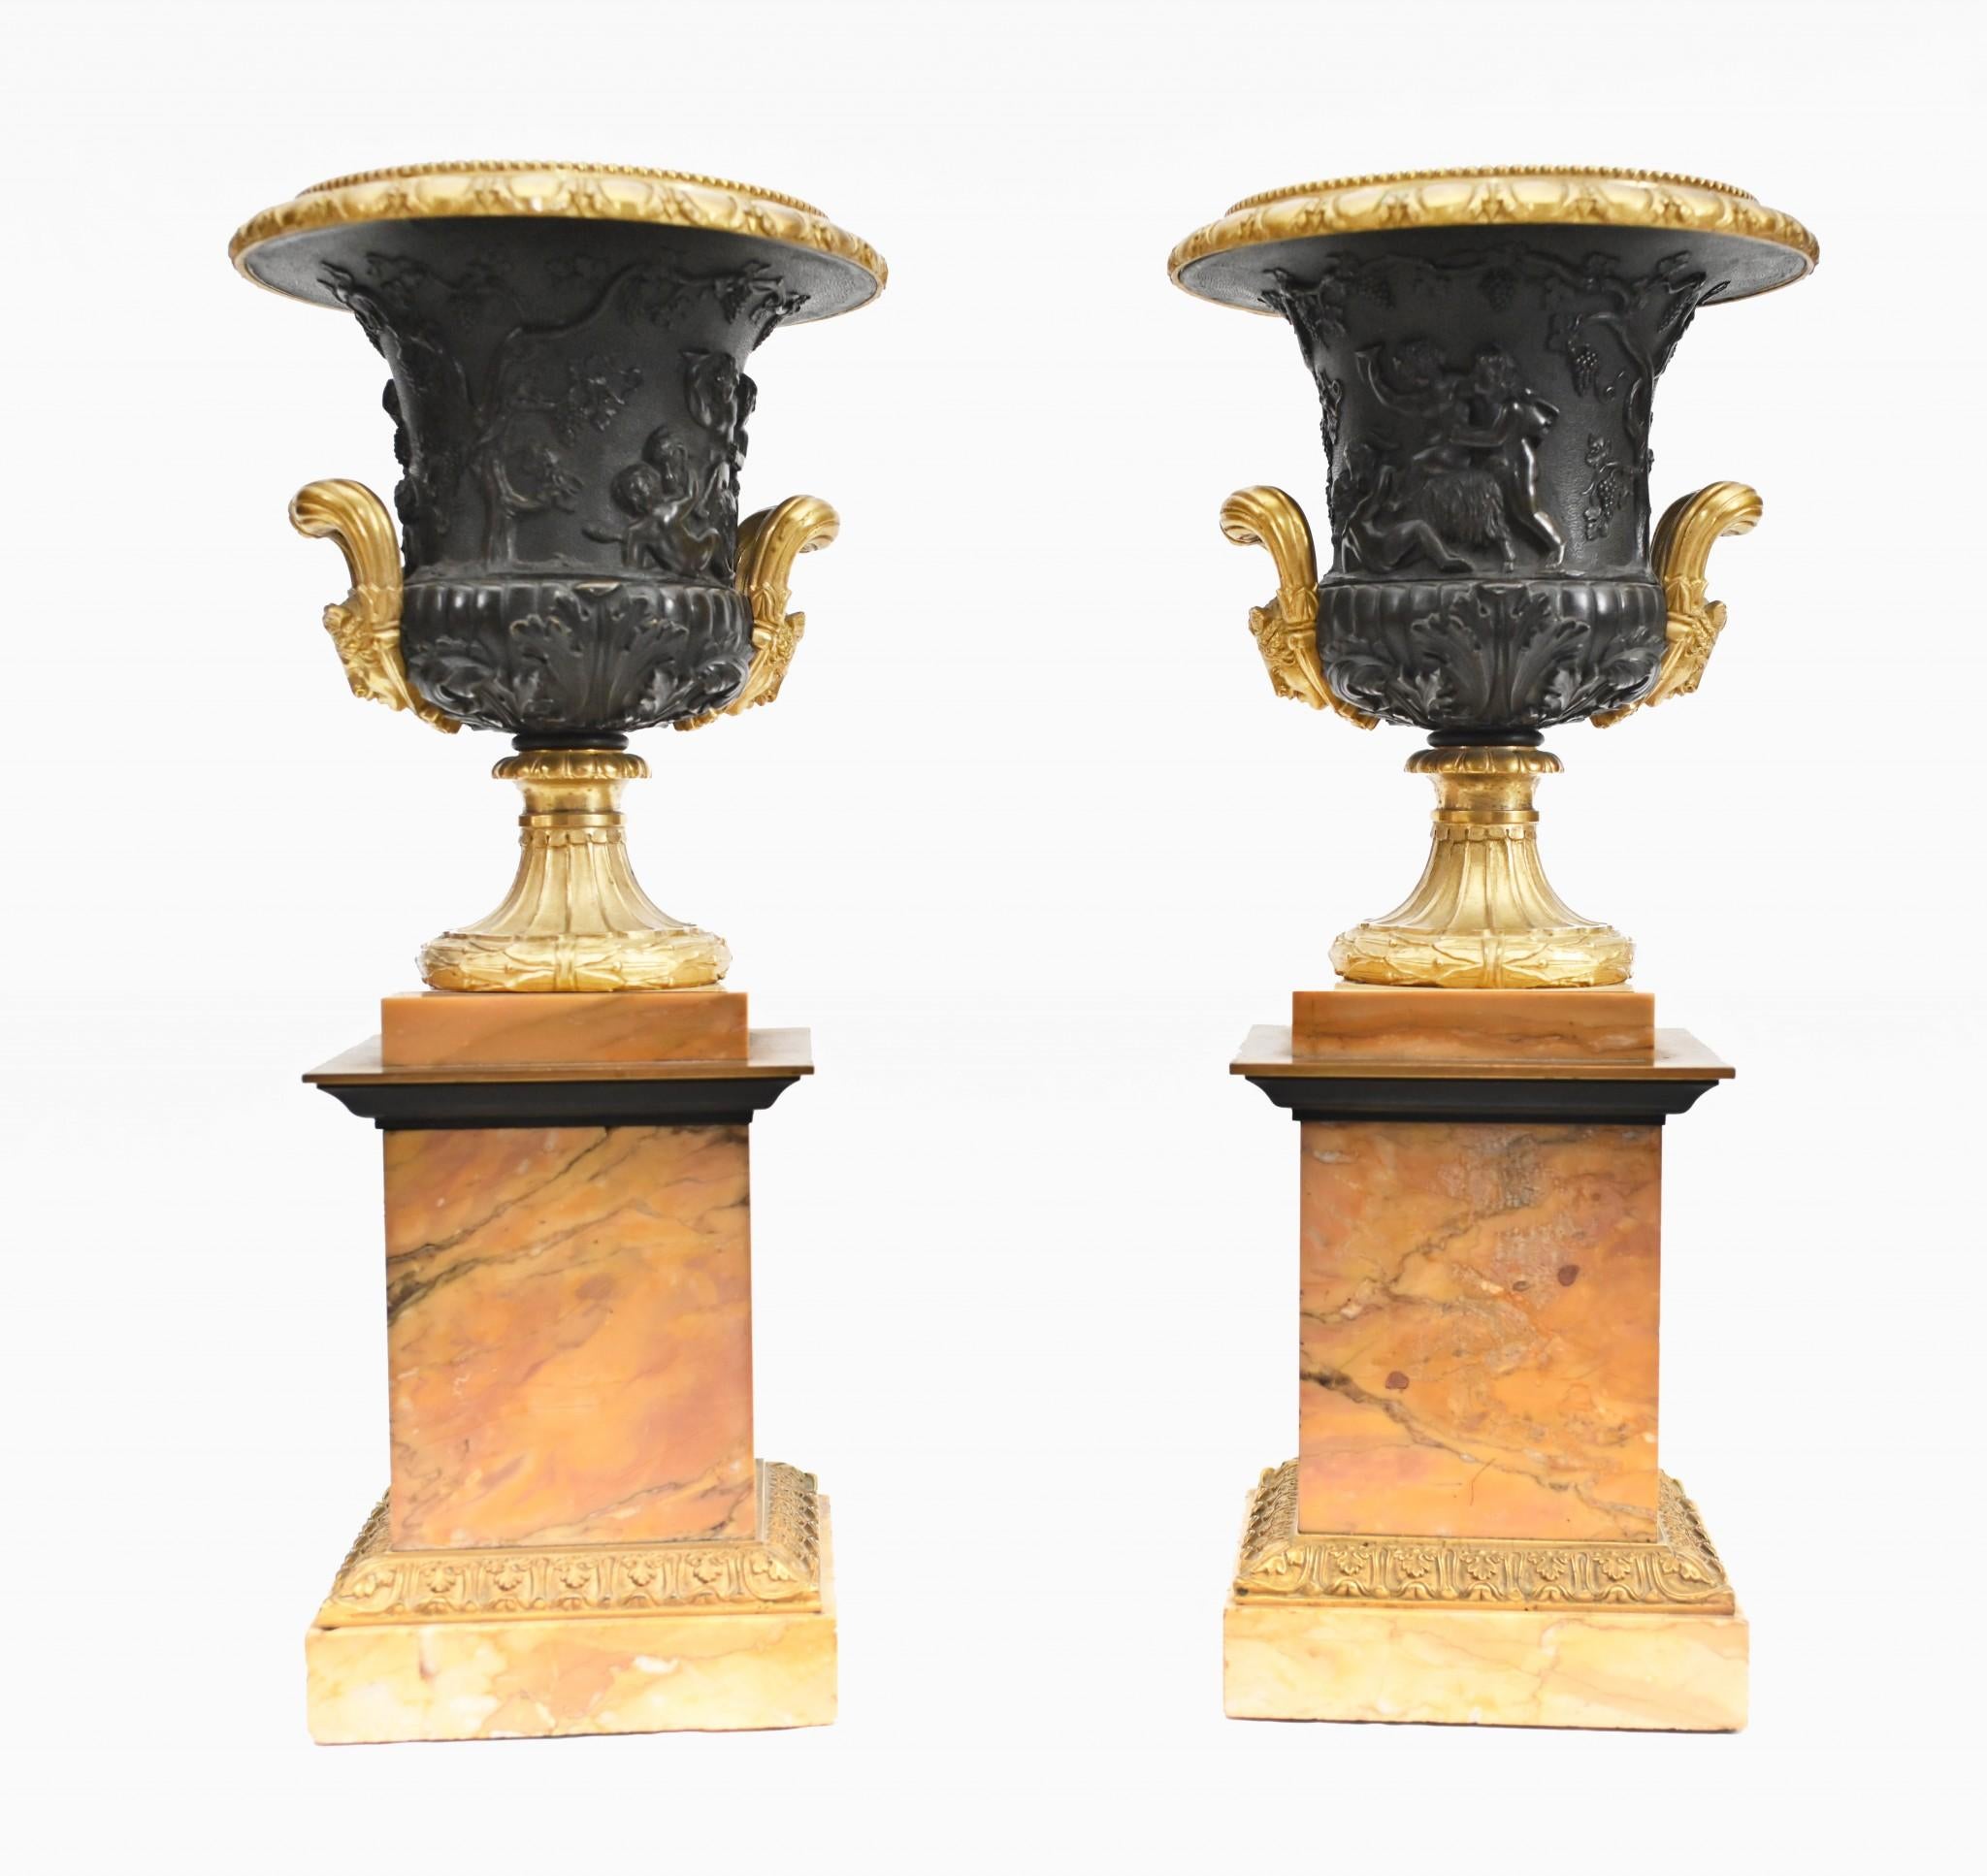 Absolutely stunning pair of bronze urns mounted on salmon pink marble pedestals
The urns feature cherub scenes in relief around the urns as the partake in a Bacchanalian revelery whilst imbibing the grape
These are a fabulous, high collectable pair